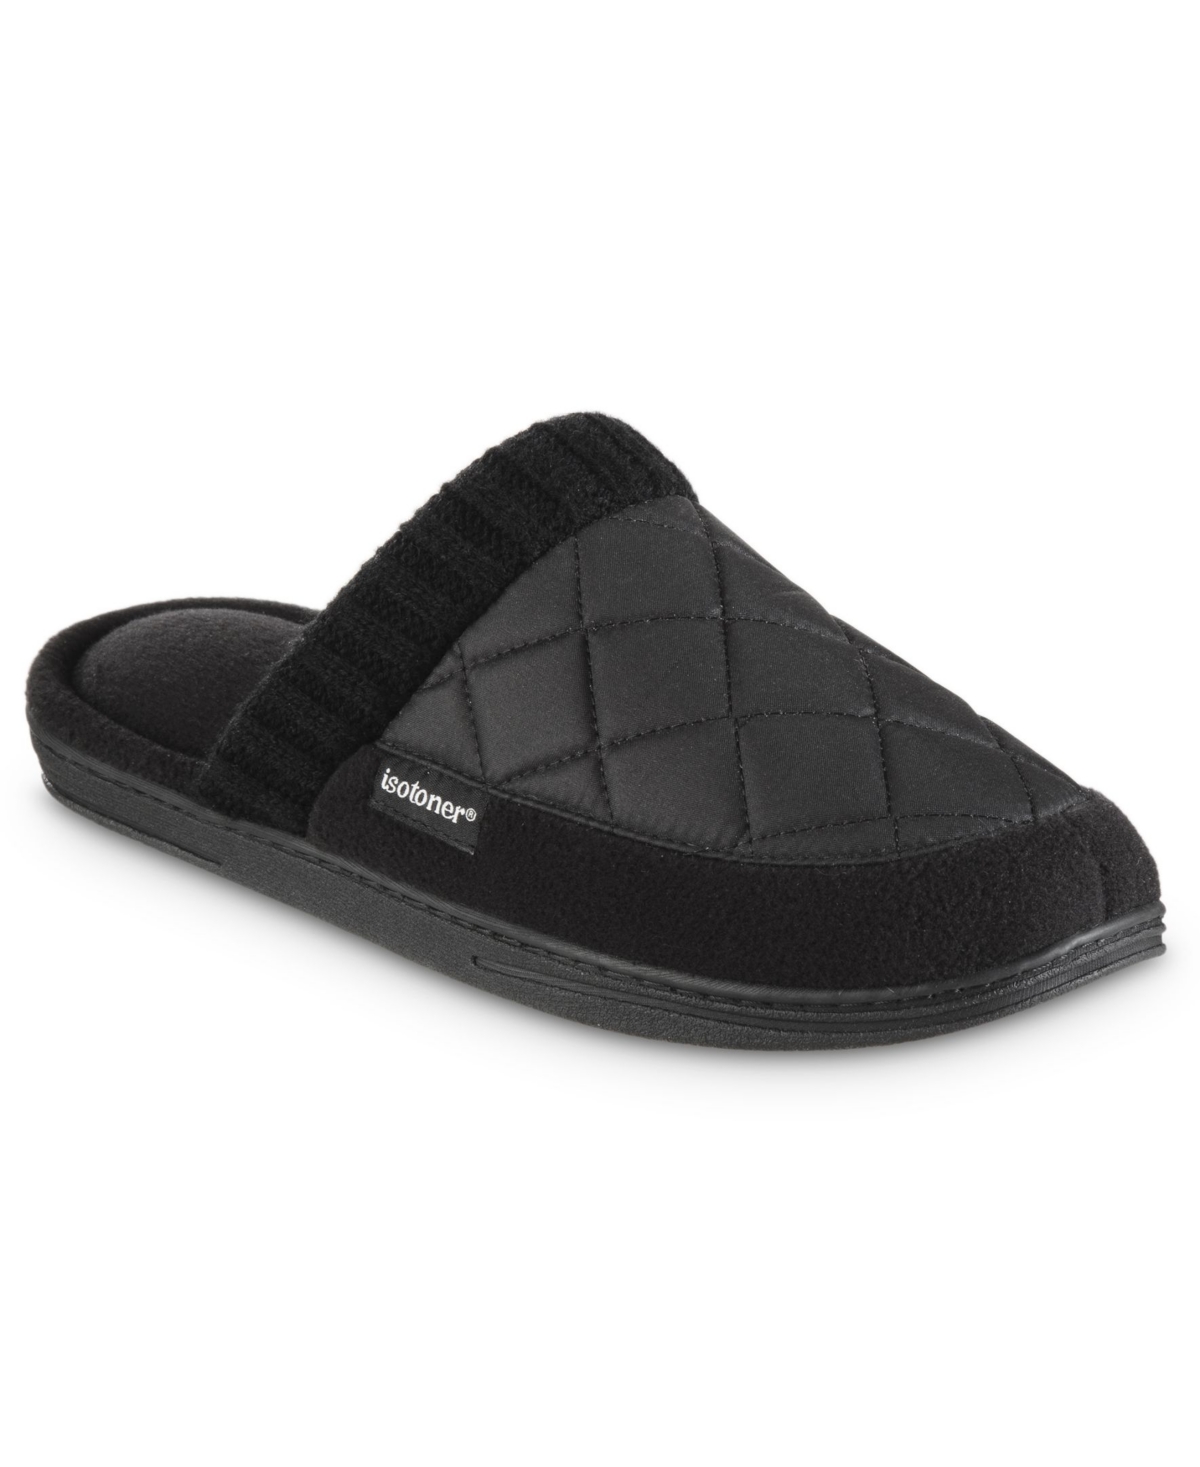 Isotoner Men's Memory Foam Quilted Levon Clog Slippers